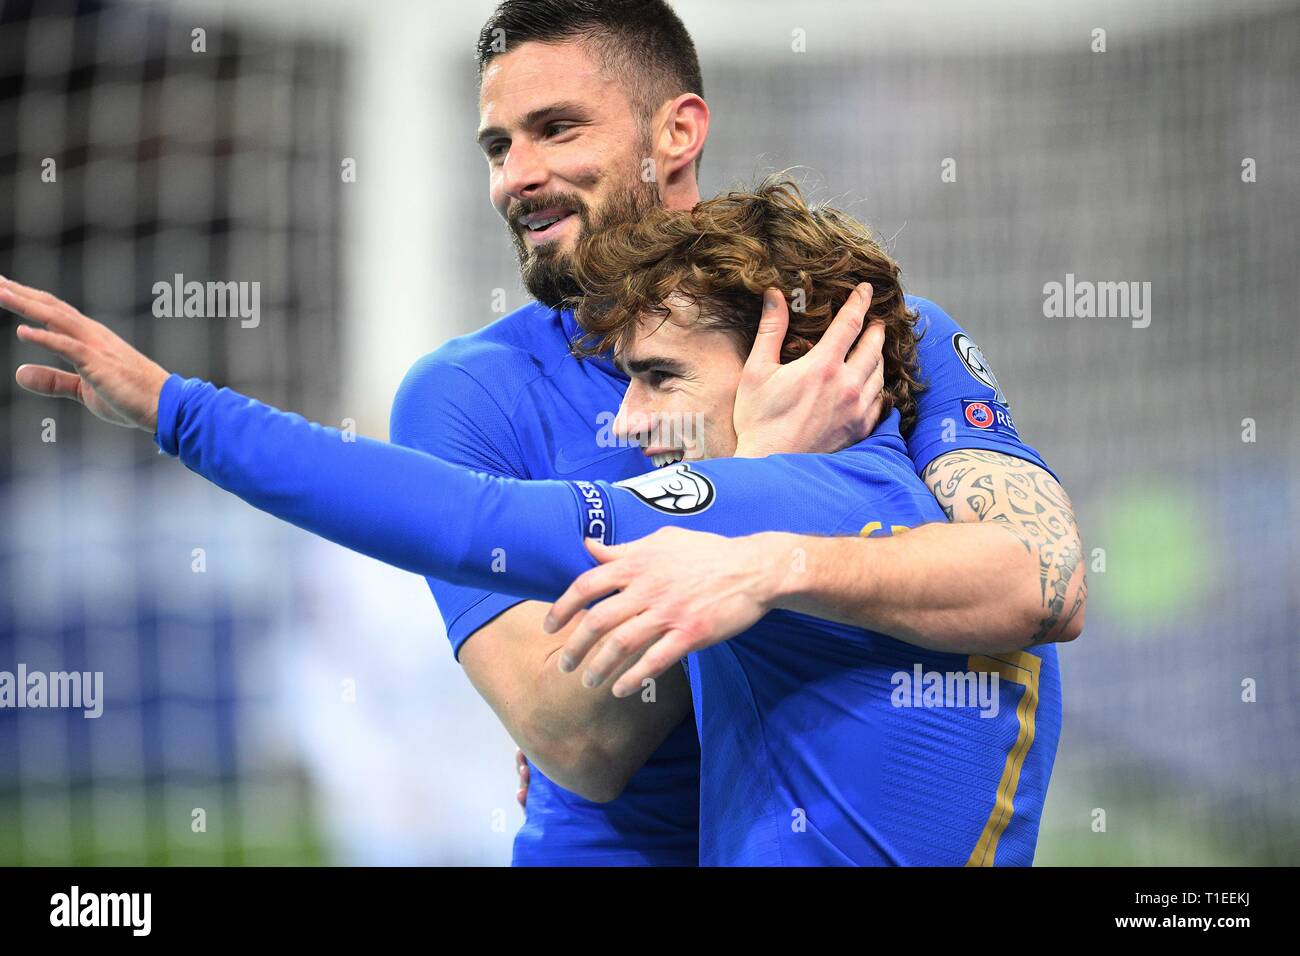 Paris, Paris. 25th Mar, 2019. Antoine Griezmann (R) of France celebrates his goal with his teammate Olivier Giroud during the UEFA Euro 2020 Group H qualification match between France and Iceland in Saint-Denis, north of Paris, France on March 25, 2019. France won 4-0. Credit: Jack Chan/Xinhua/Alamy Live News Stock Photo